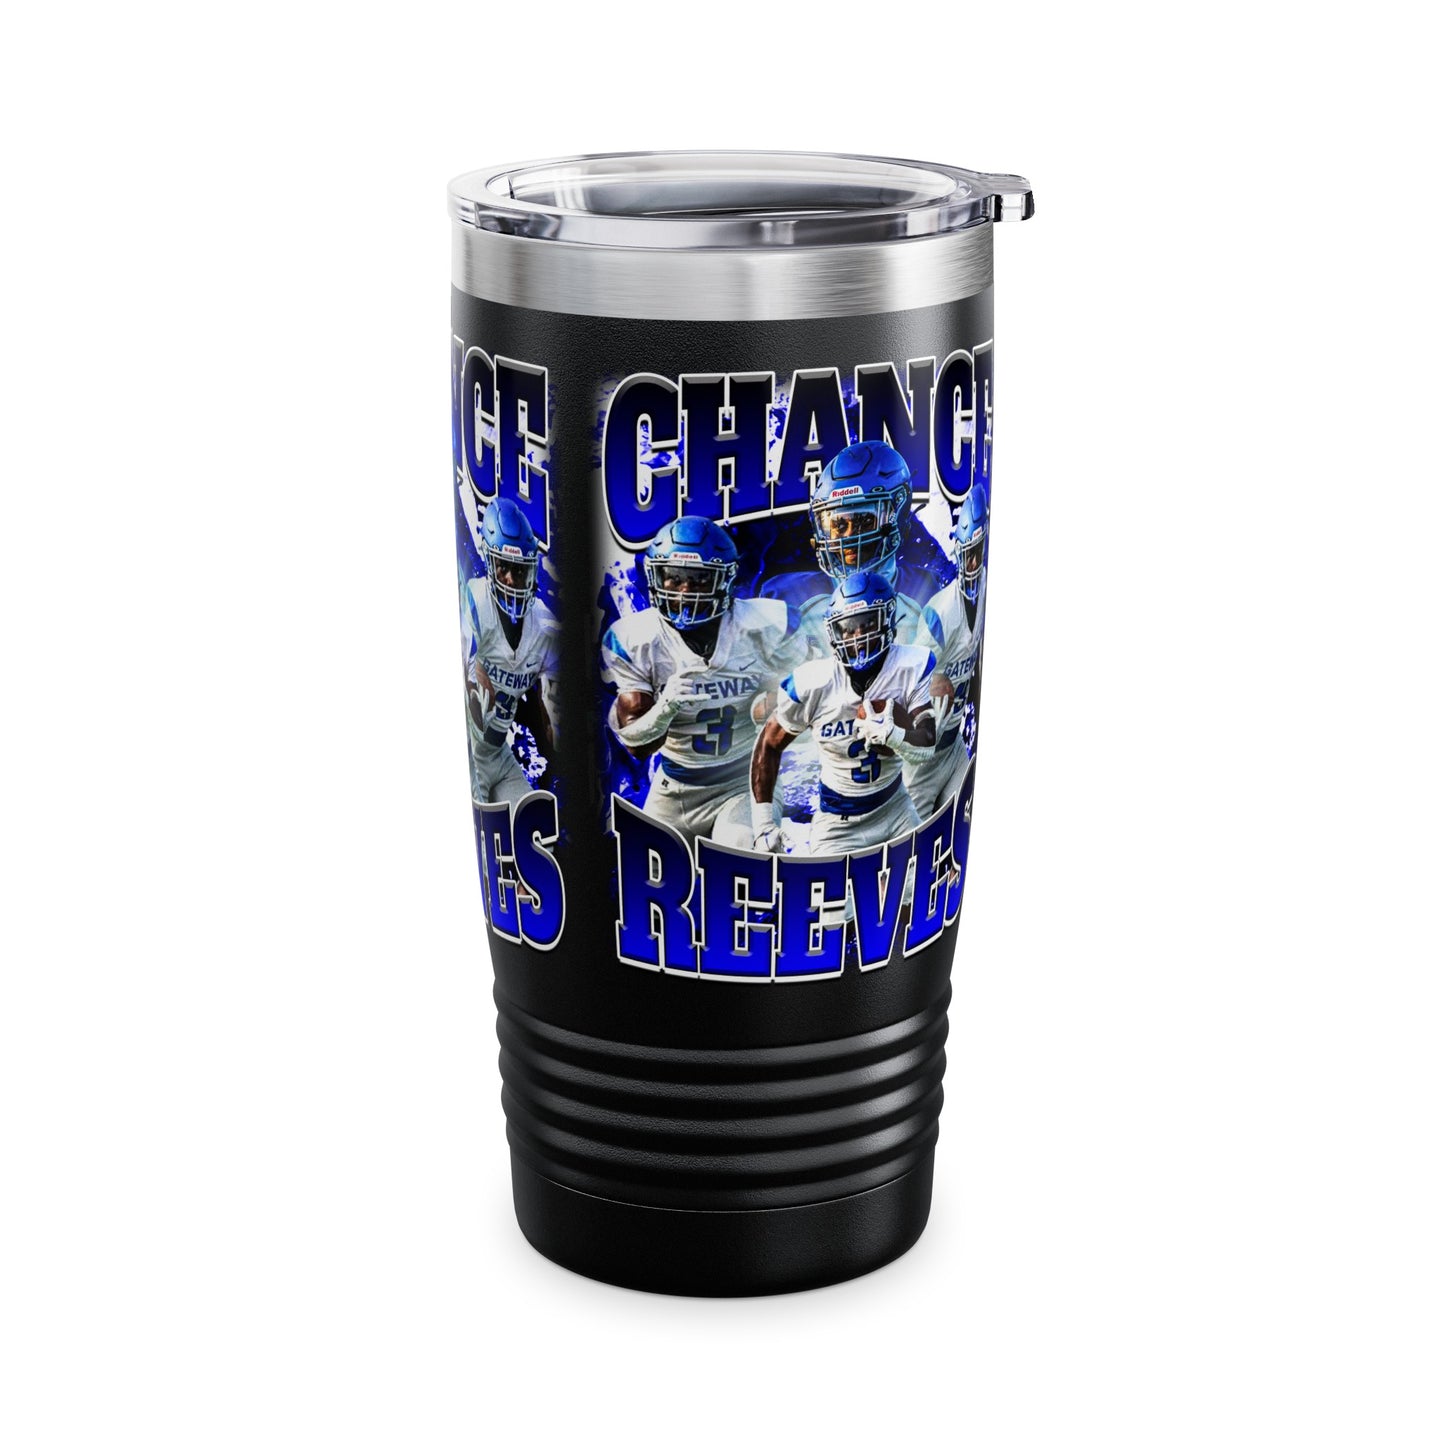 Chance Reeves Stainless Steal Tumbler